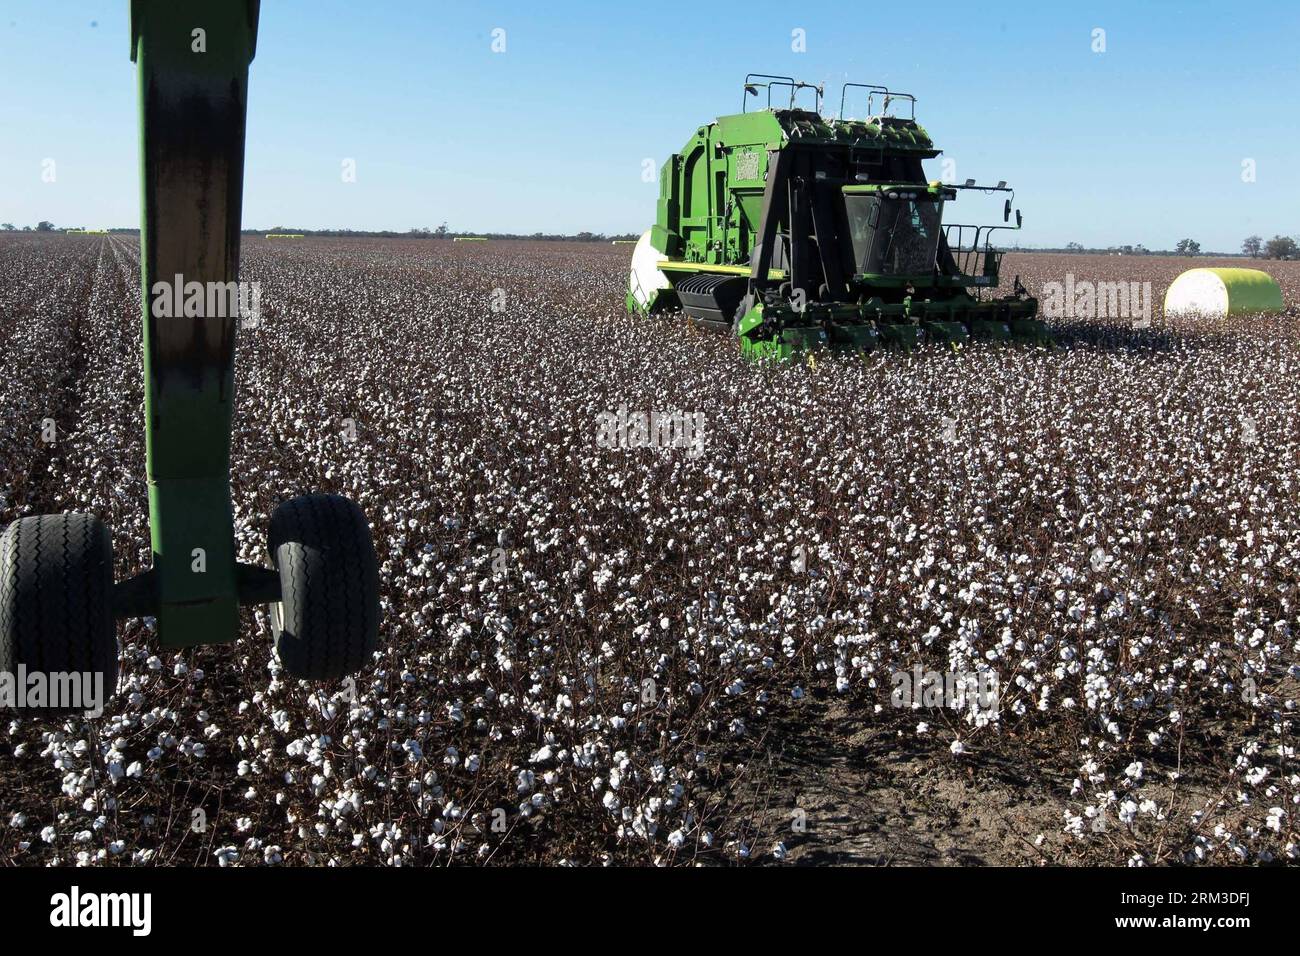 Bildnummer: 60154771  Datum: 17.07.2013  Copyright: imago/Xinhua SYDNEY, July 17 2013 - A worker drives a cotton-harvesting machine at UNIBALE, a subsidiary of Chinatex Corporation, in Moree, New South Wales, Australia, on July 17, 2013. Chinatex Corporation purchased the cotton base to plant cotton in Moree in early 1990s. The base, covering an area of 5,200 hectares, owns the anual productivity of more than 2,700,000 kg unginned cotton and provides mainly for Chinatex Corporation and partly for international market. (Xinhua/Jin Linpeng) (lr) AUSTRALIA-NEW SOUTH WALES-MOREE-CHINATEX CORP-COTT Stock Photo